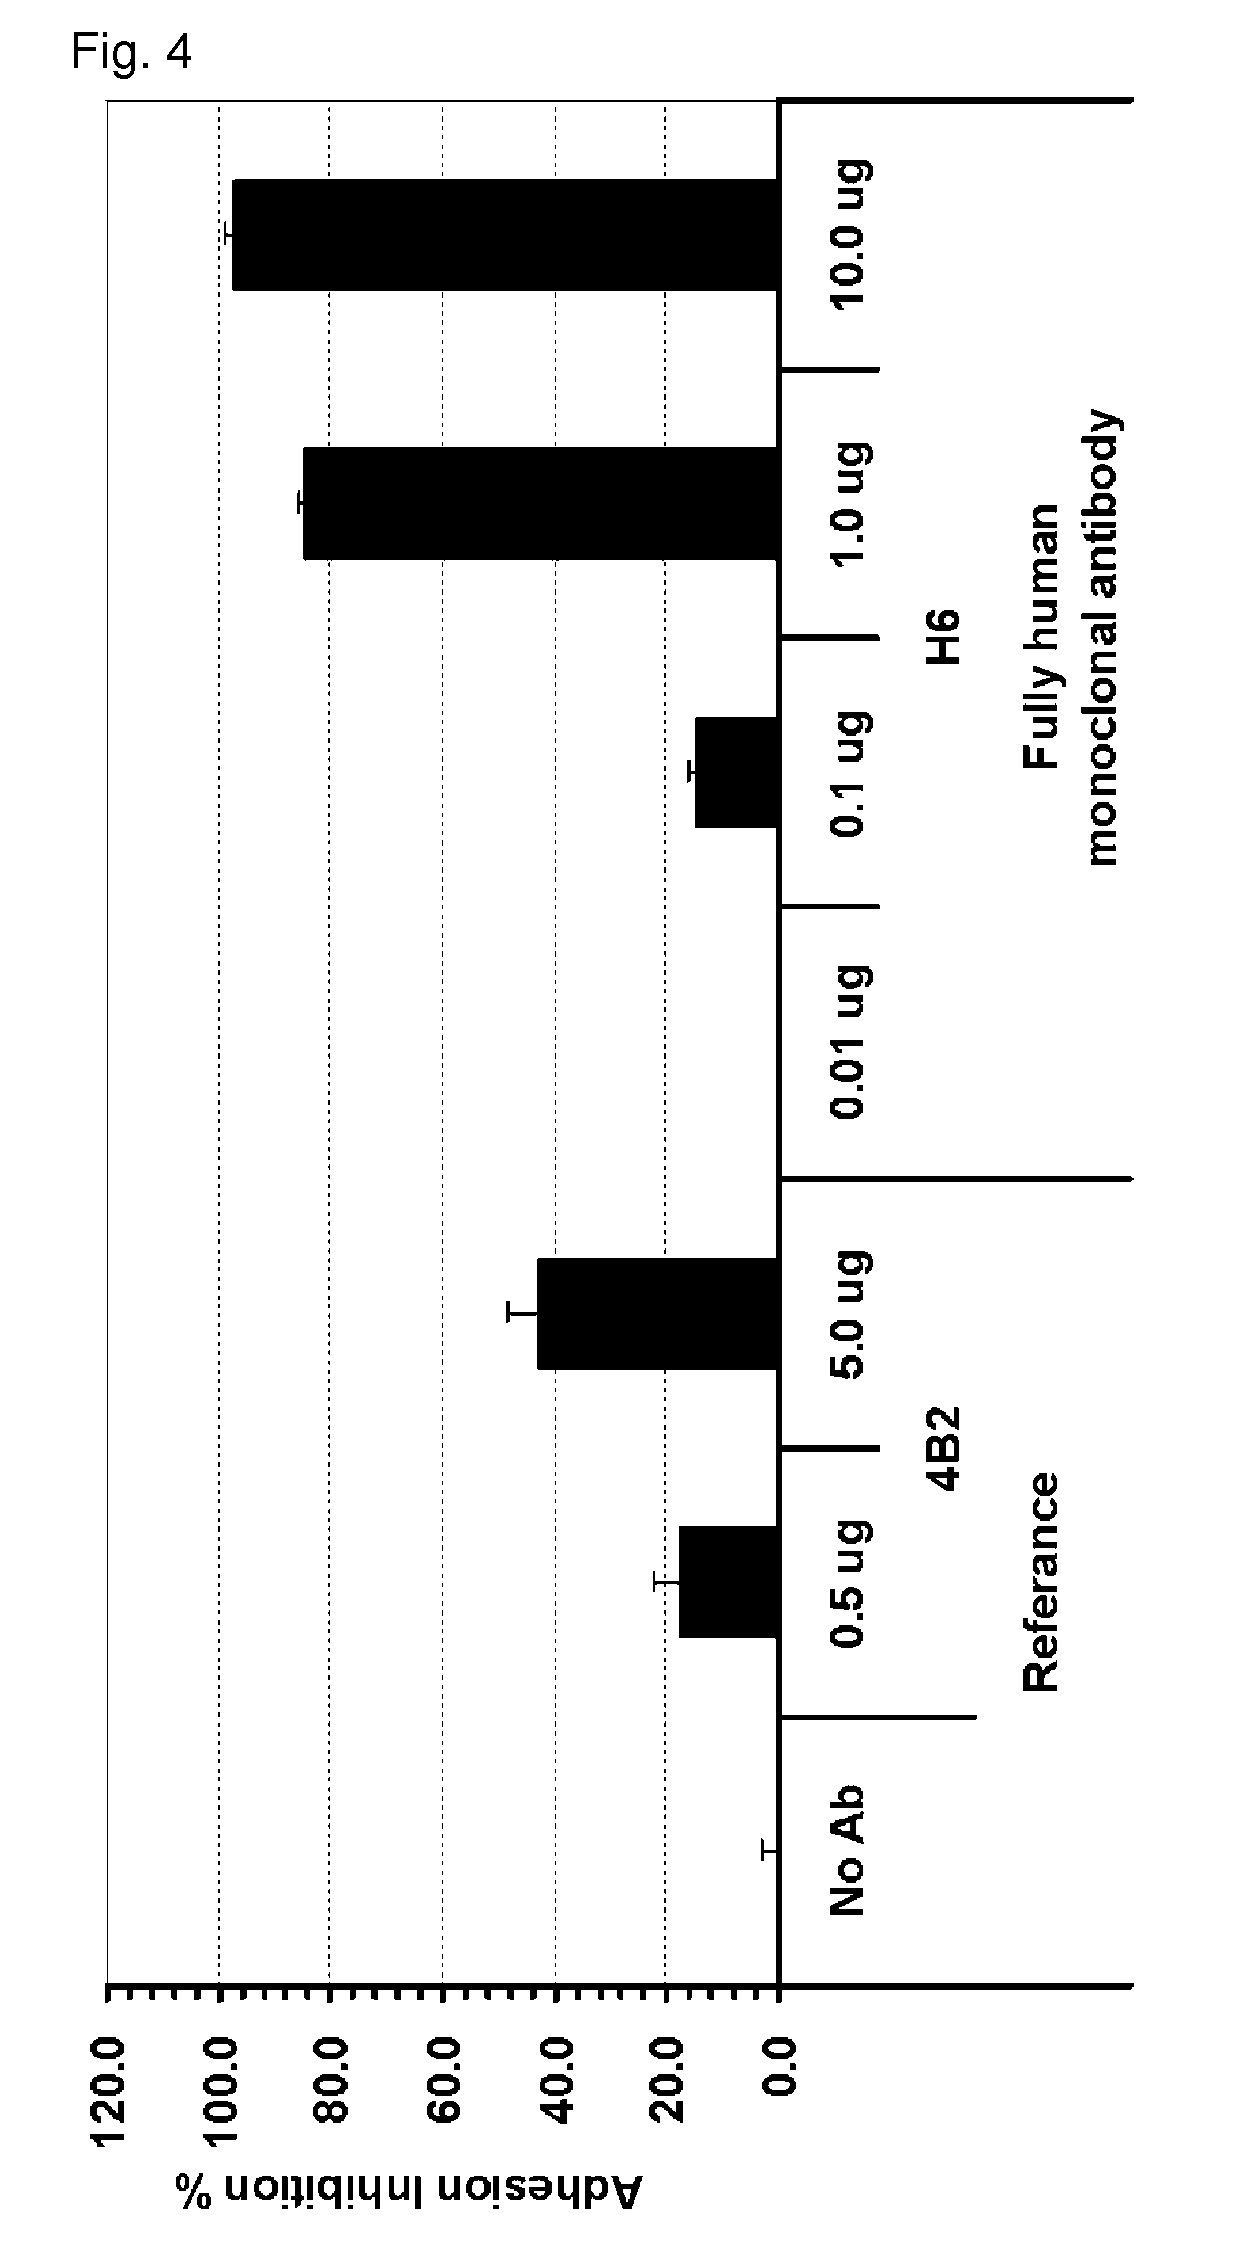 Human recombinant monoclonal antibody that specifically binds to VCAM-1 and inhibits adhesion and transmigration between leukocytes and endothelial cells